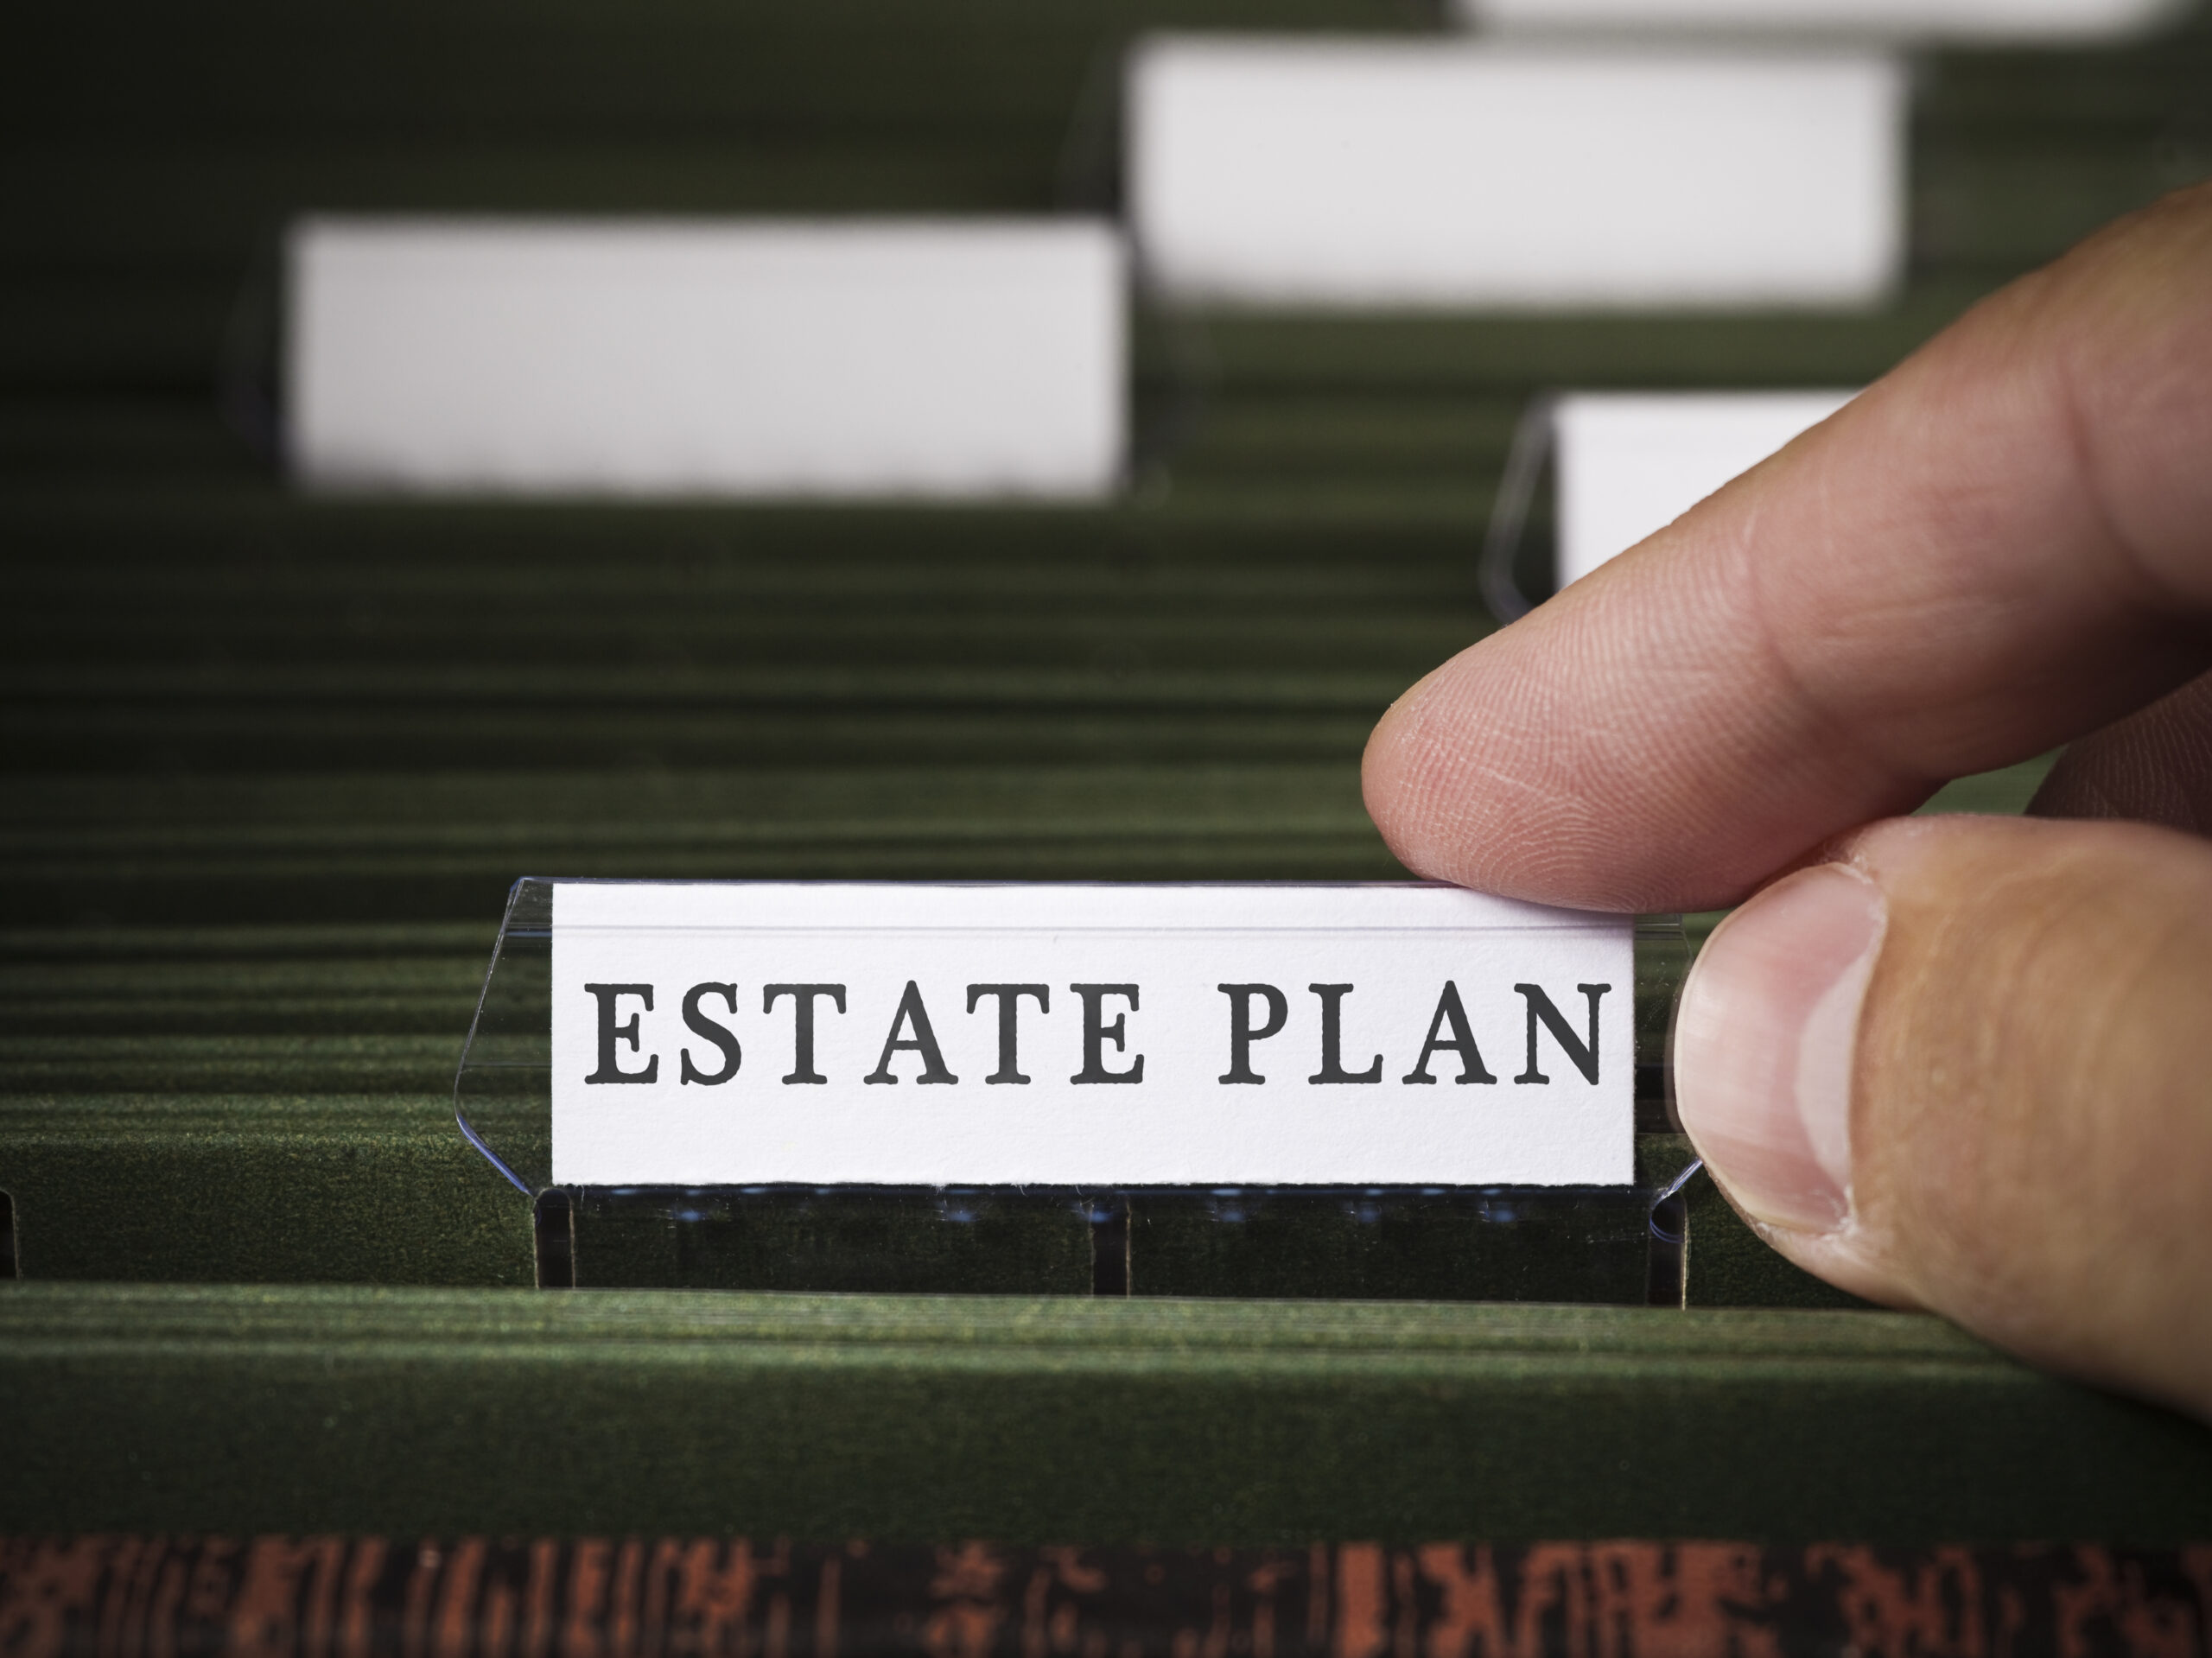 3 Quick Suggestions for Planning Your Estate Hilltop Wealth Solutions